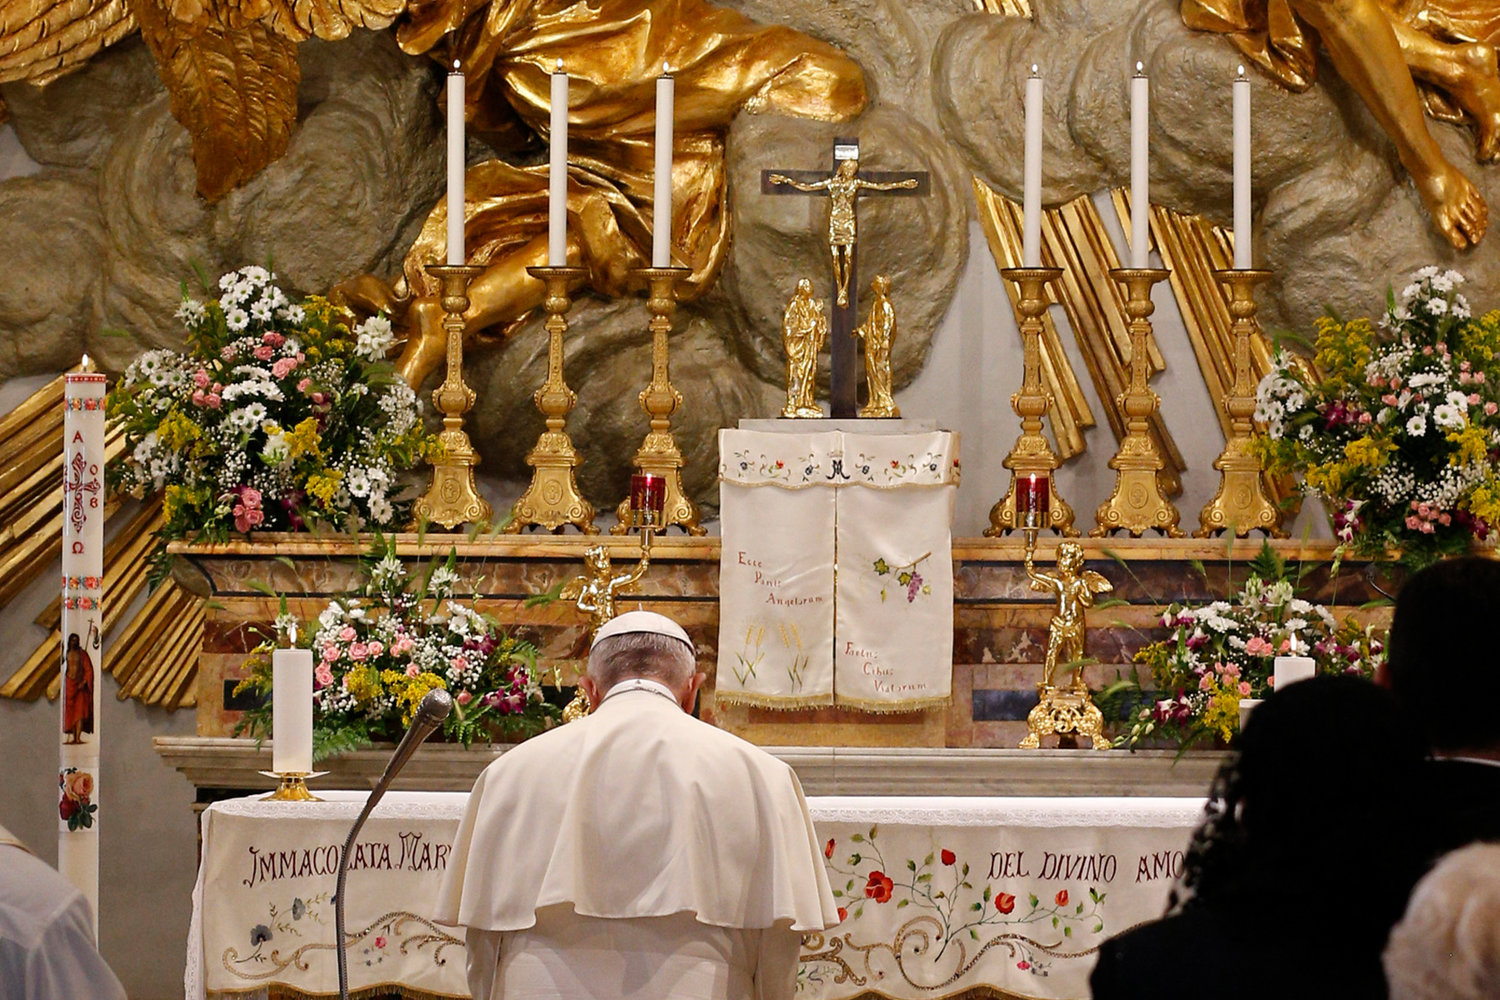 Pope Francis recites the rosary at the Shrine of Our Lady of Divine Love in Rome in this 2018 file photo. On March 11, 2020, in the midst of the COVID-19 pandemic, he entrusted the world to Mary.